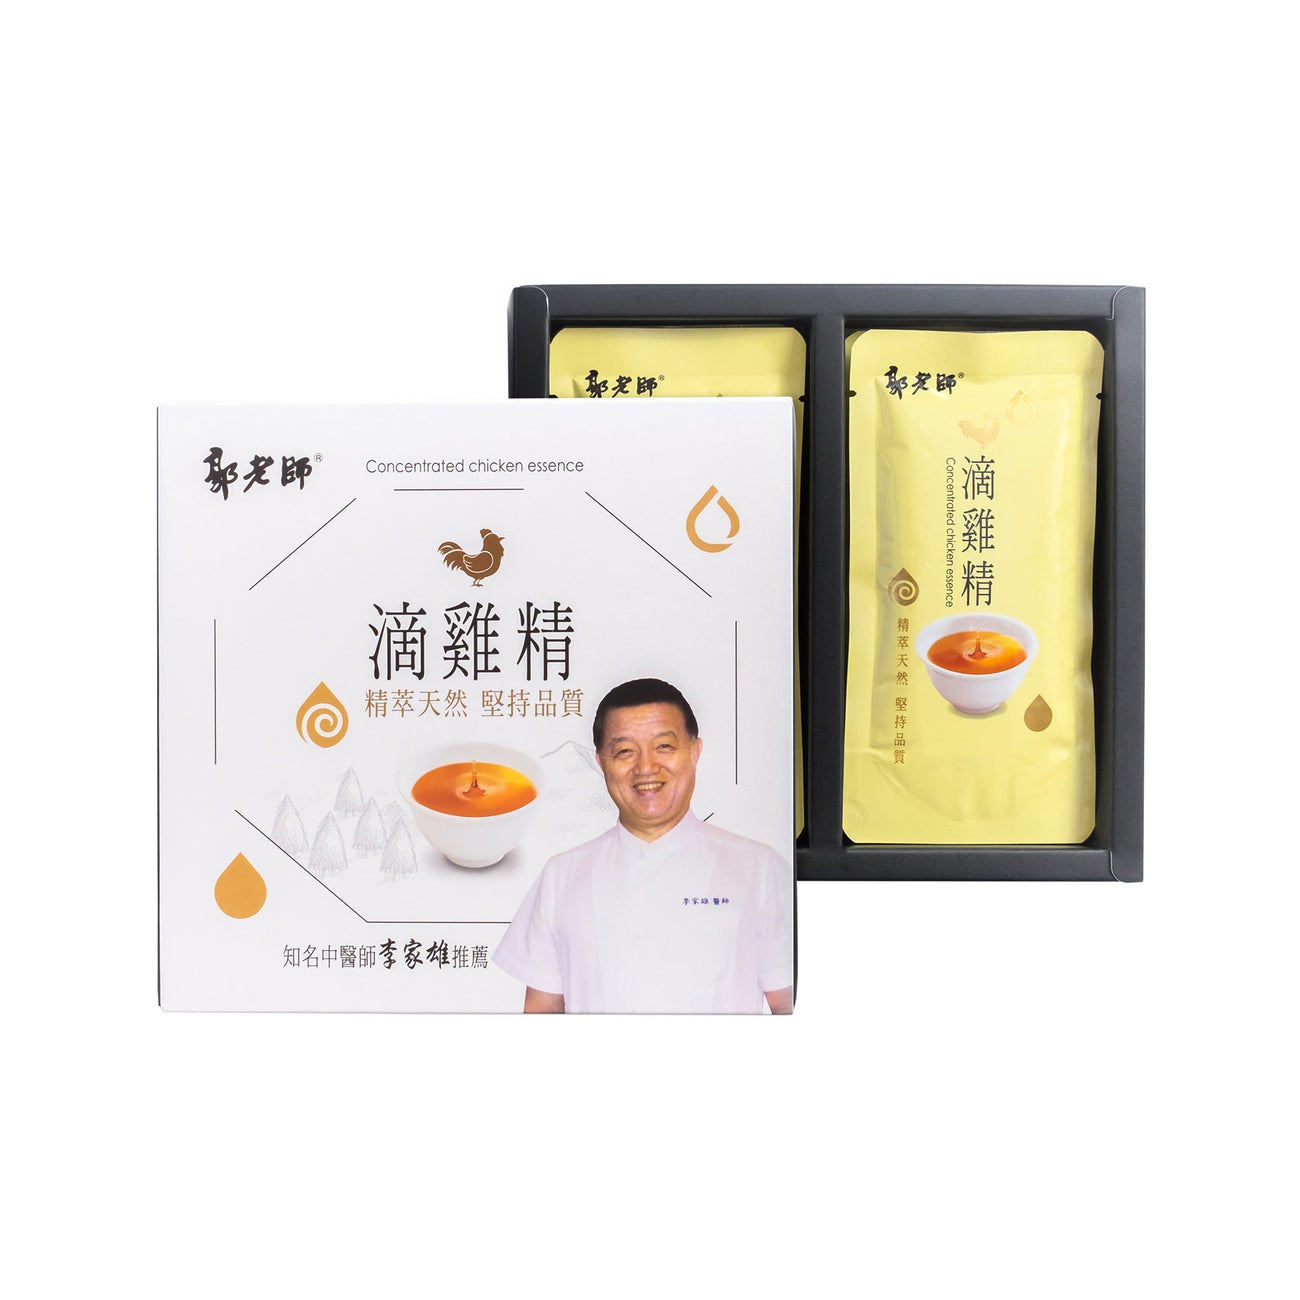 Kuo Health Concentrated Drip Chicken Essence